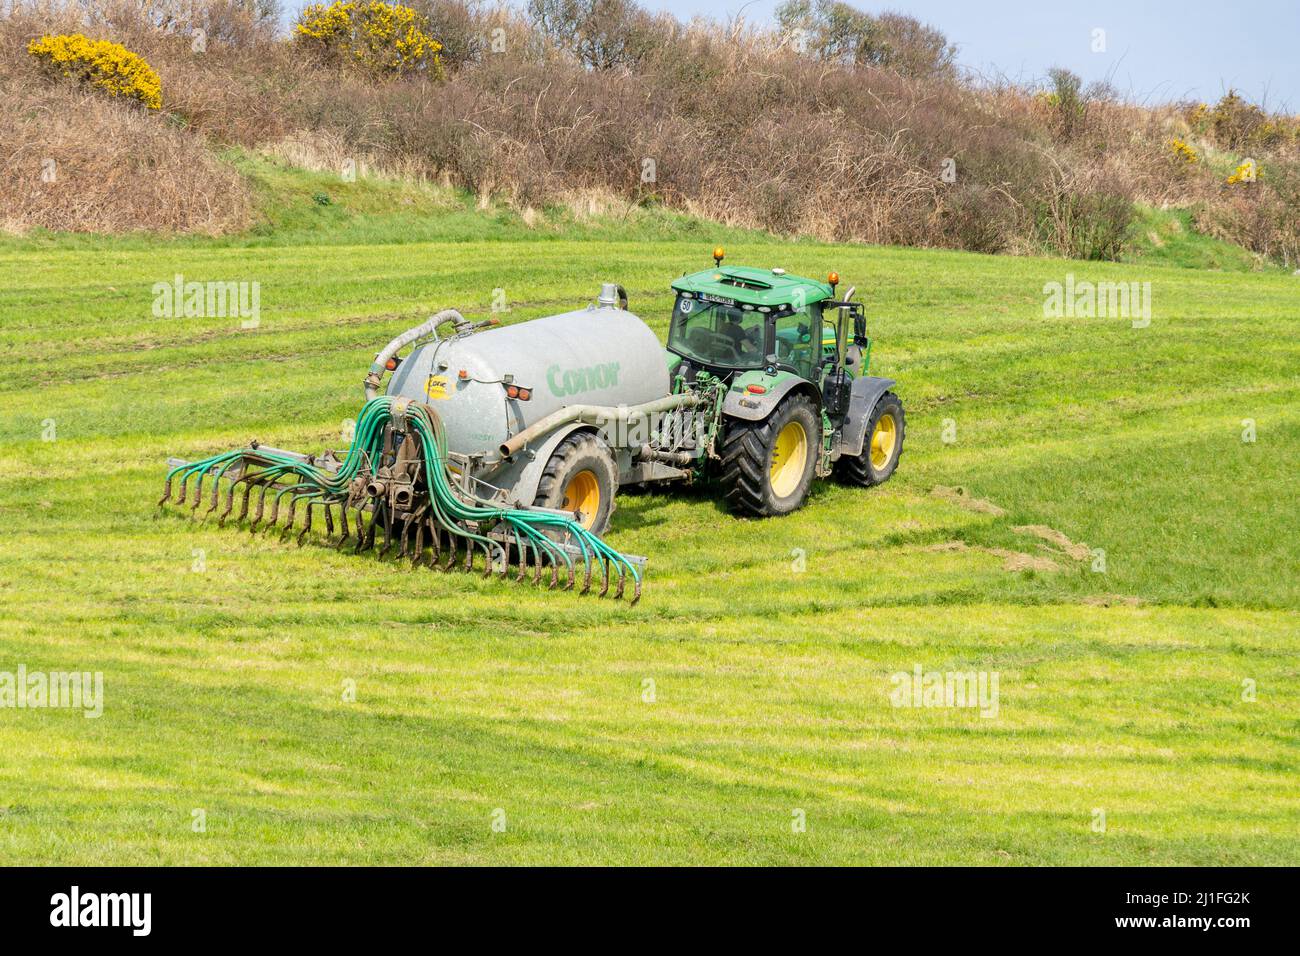 Slurry Spreading with dribble bars towed by tractor on Irish Farm Stock Photo